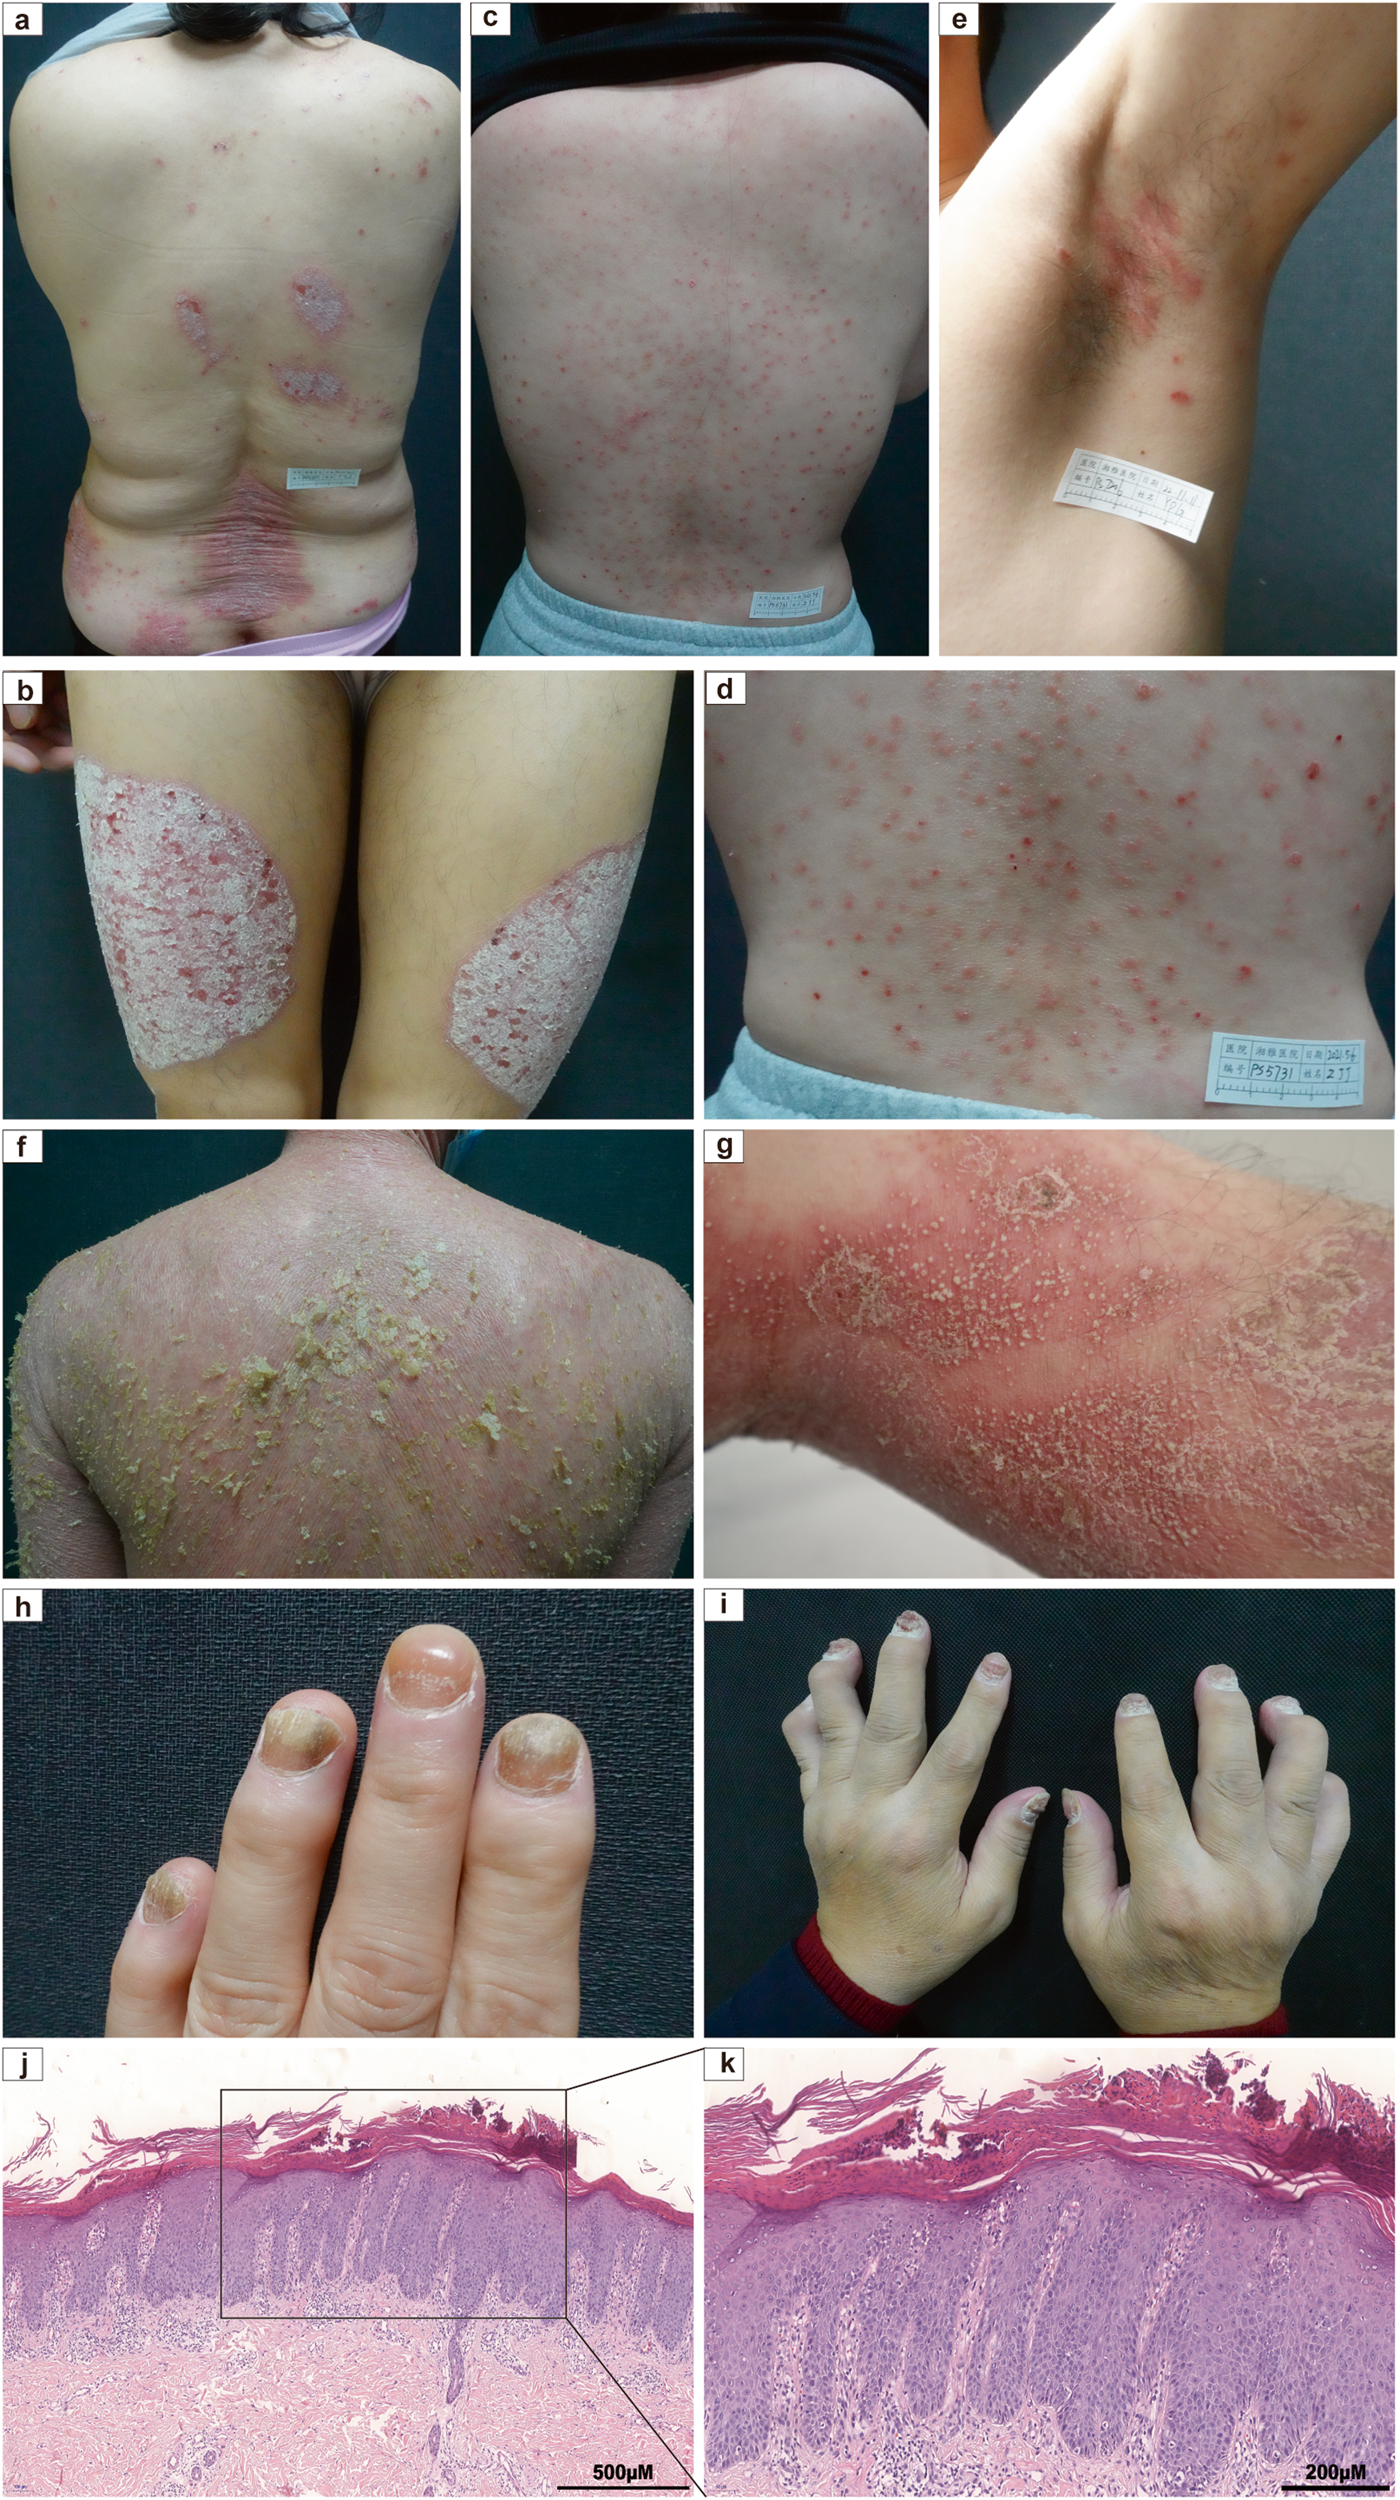 Light therapy for psoriasis: Types, effectiveness, and side effects